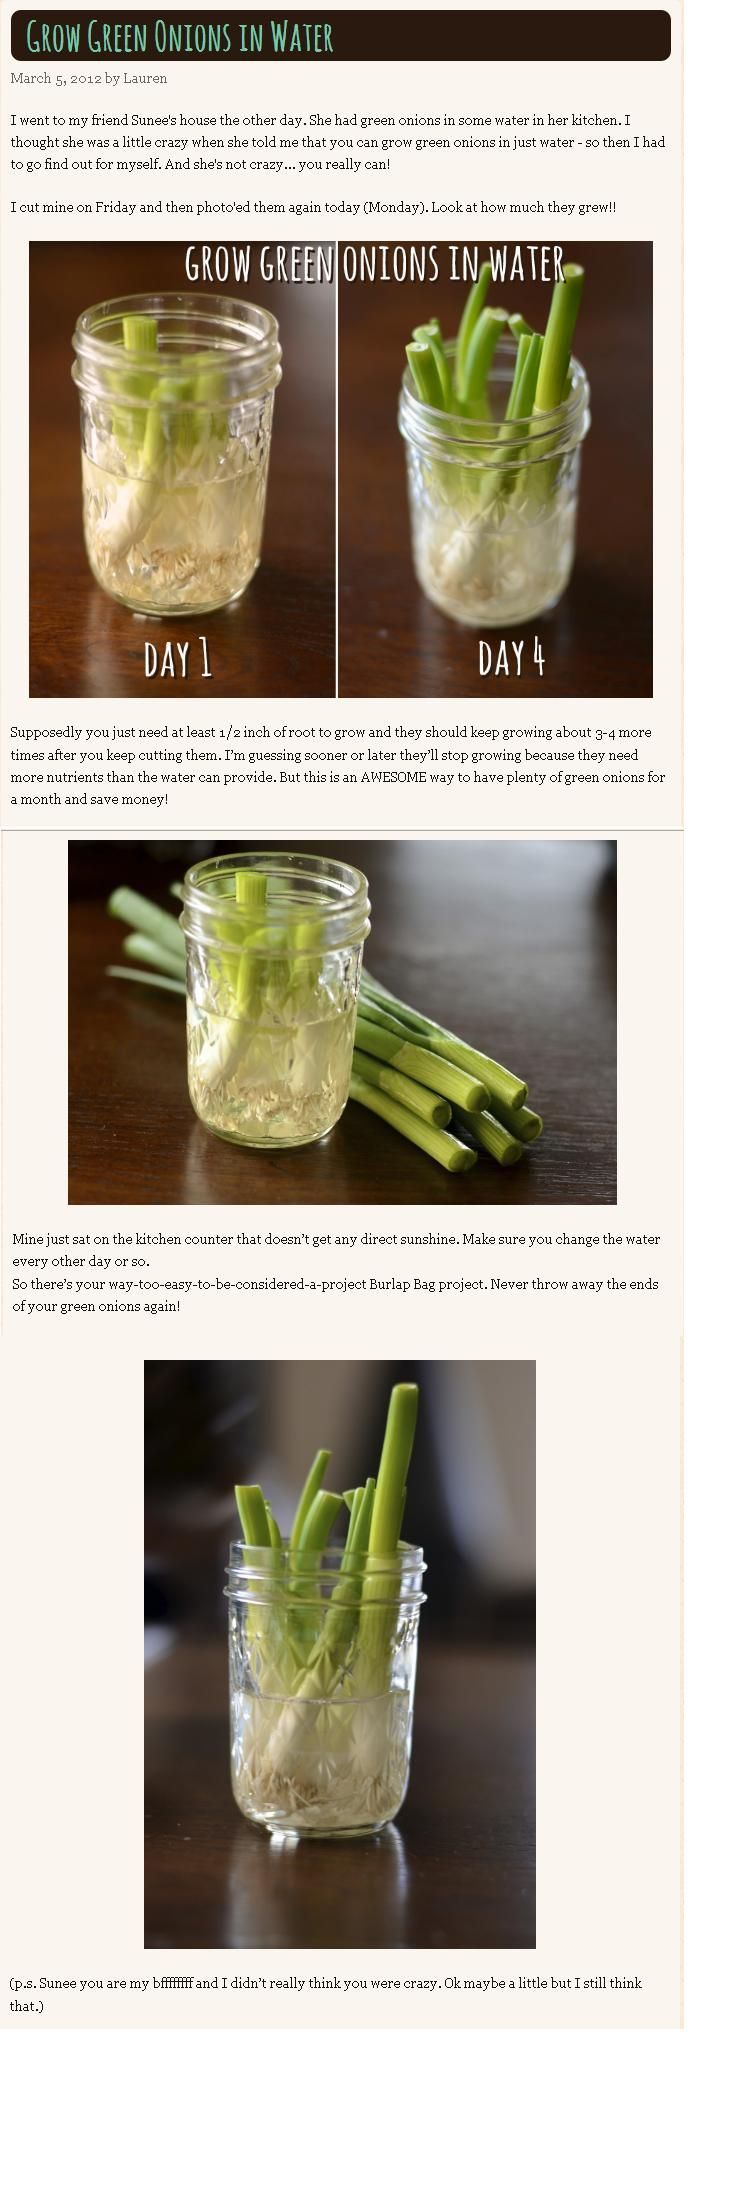 Grow Green Onions in Water. Awesome way to have plenty of green onions for a month and save money! -   How To Grow Green Onions